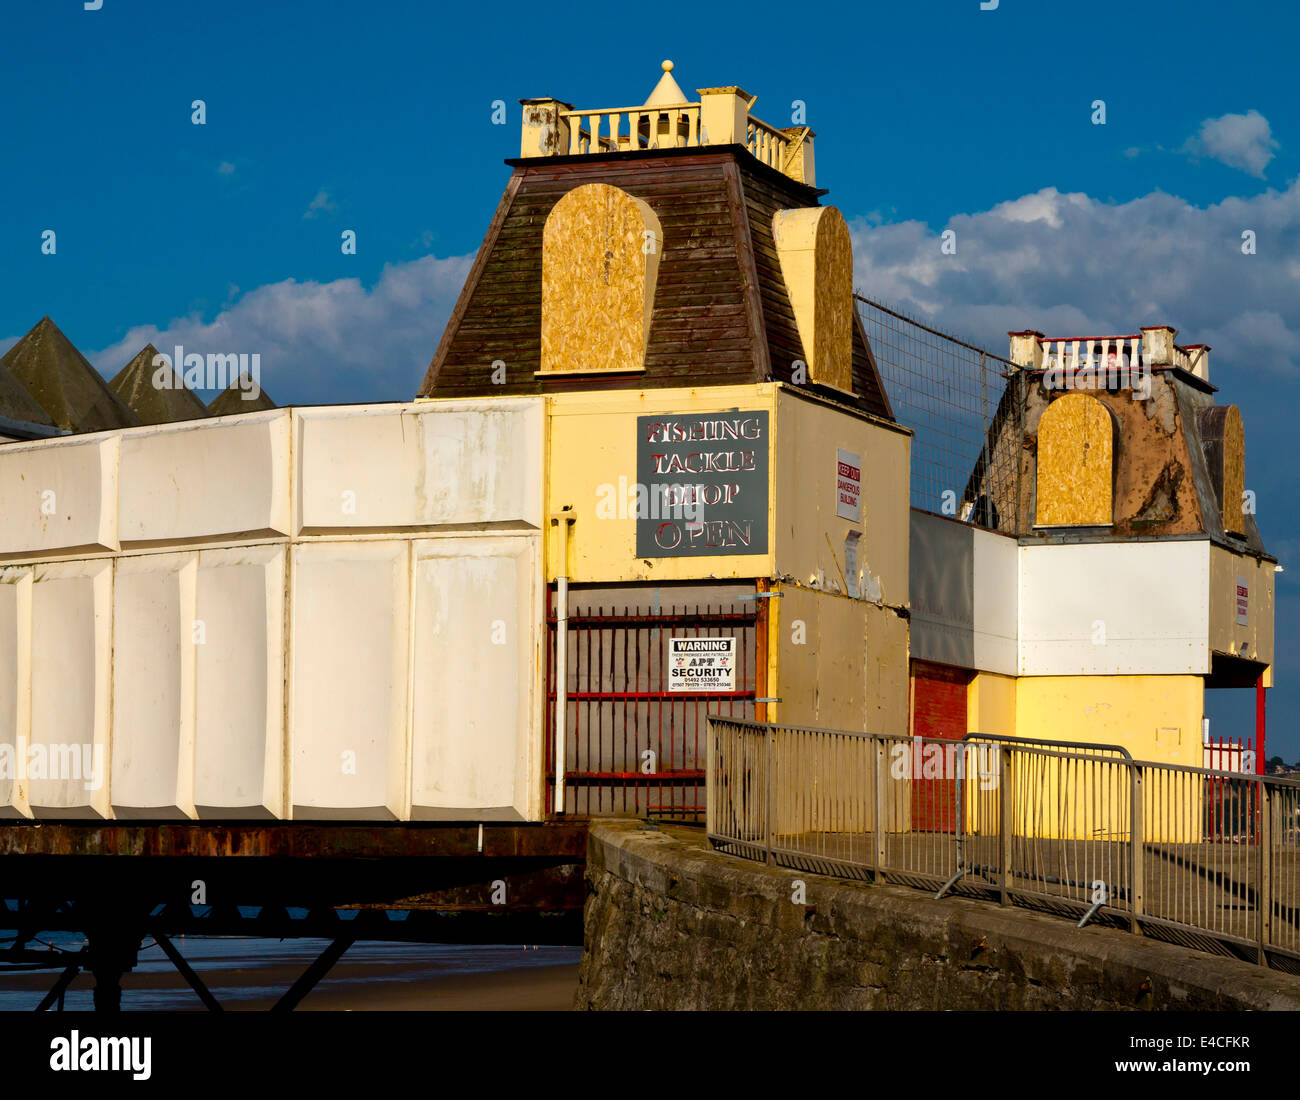 Victoria Pier in Colwyn Bay North Wales UK which opened 1900 but has been unused for many years and threatened with demolition Stock Photo